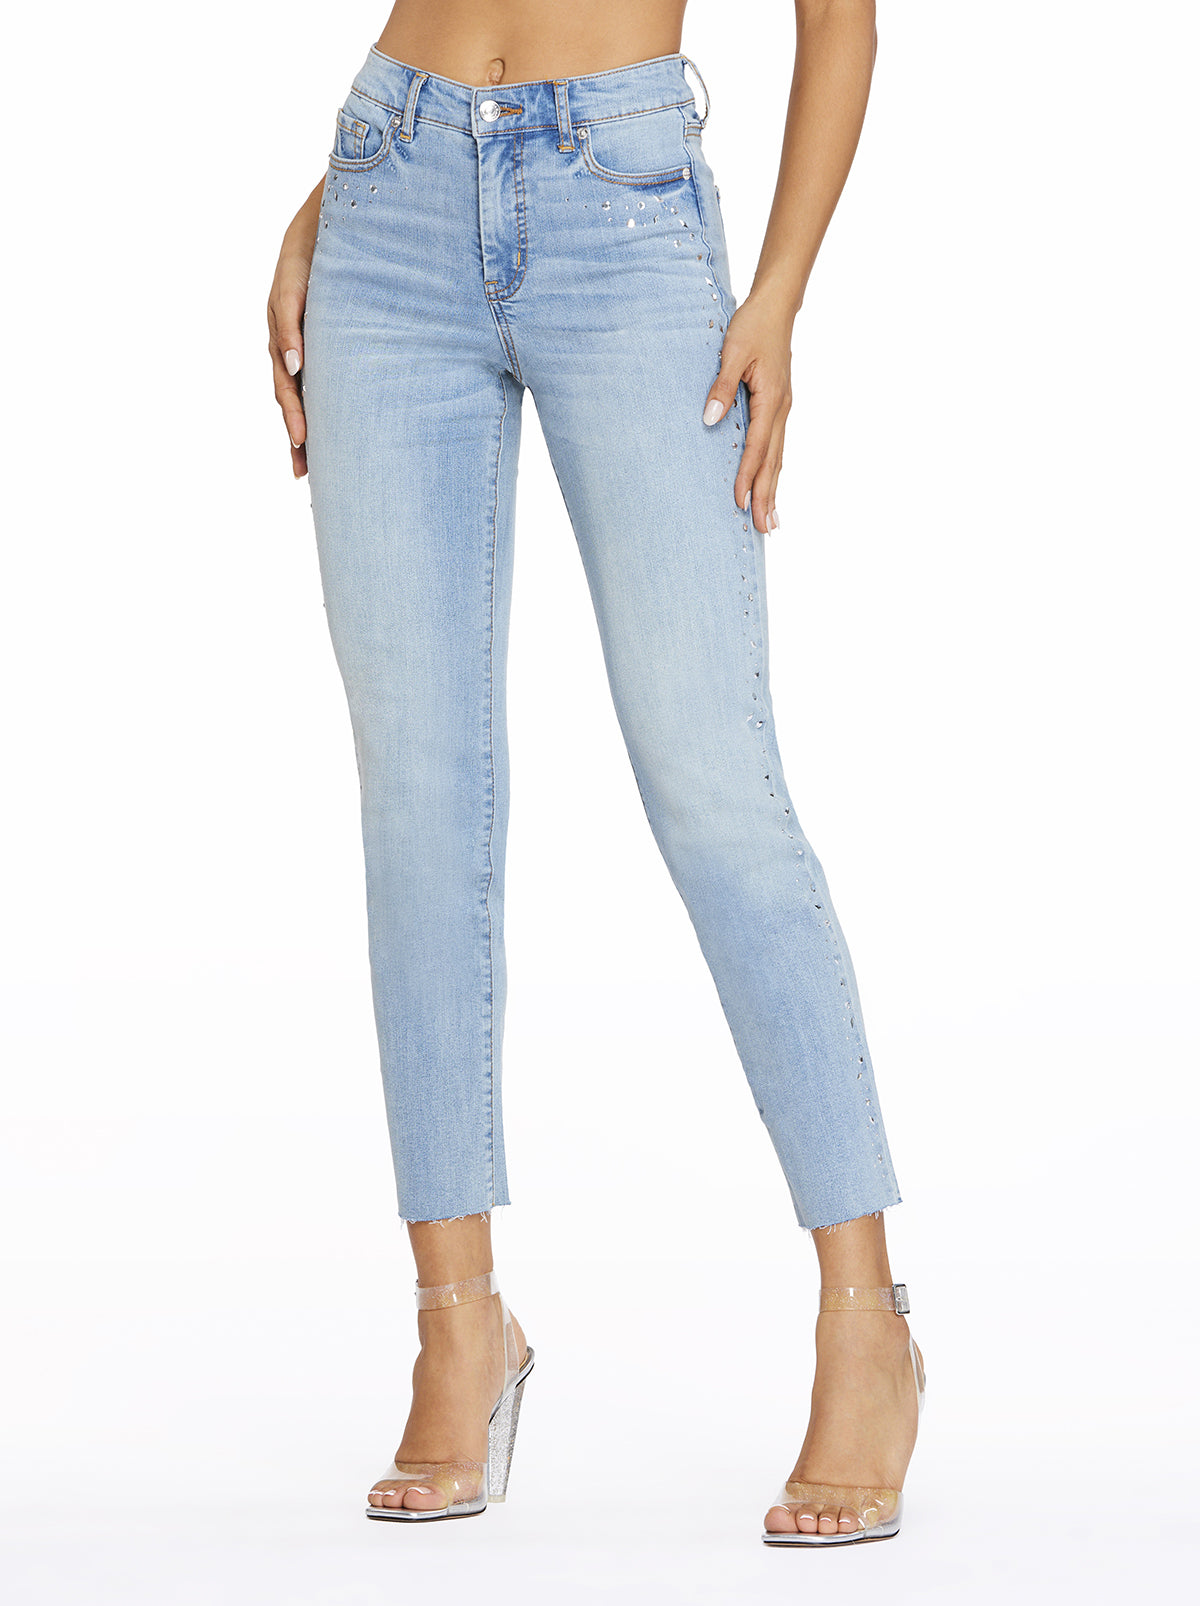 Image of Spotlight High Rise Straight Jeans in Into the Blues